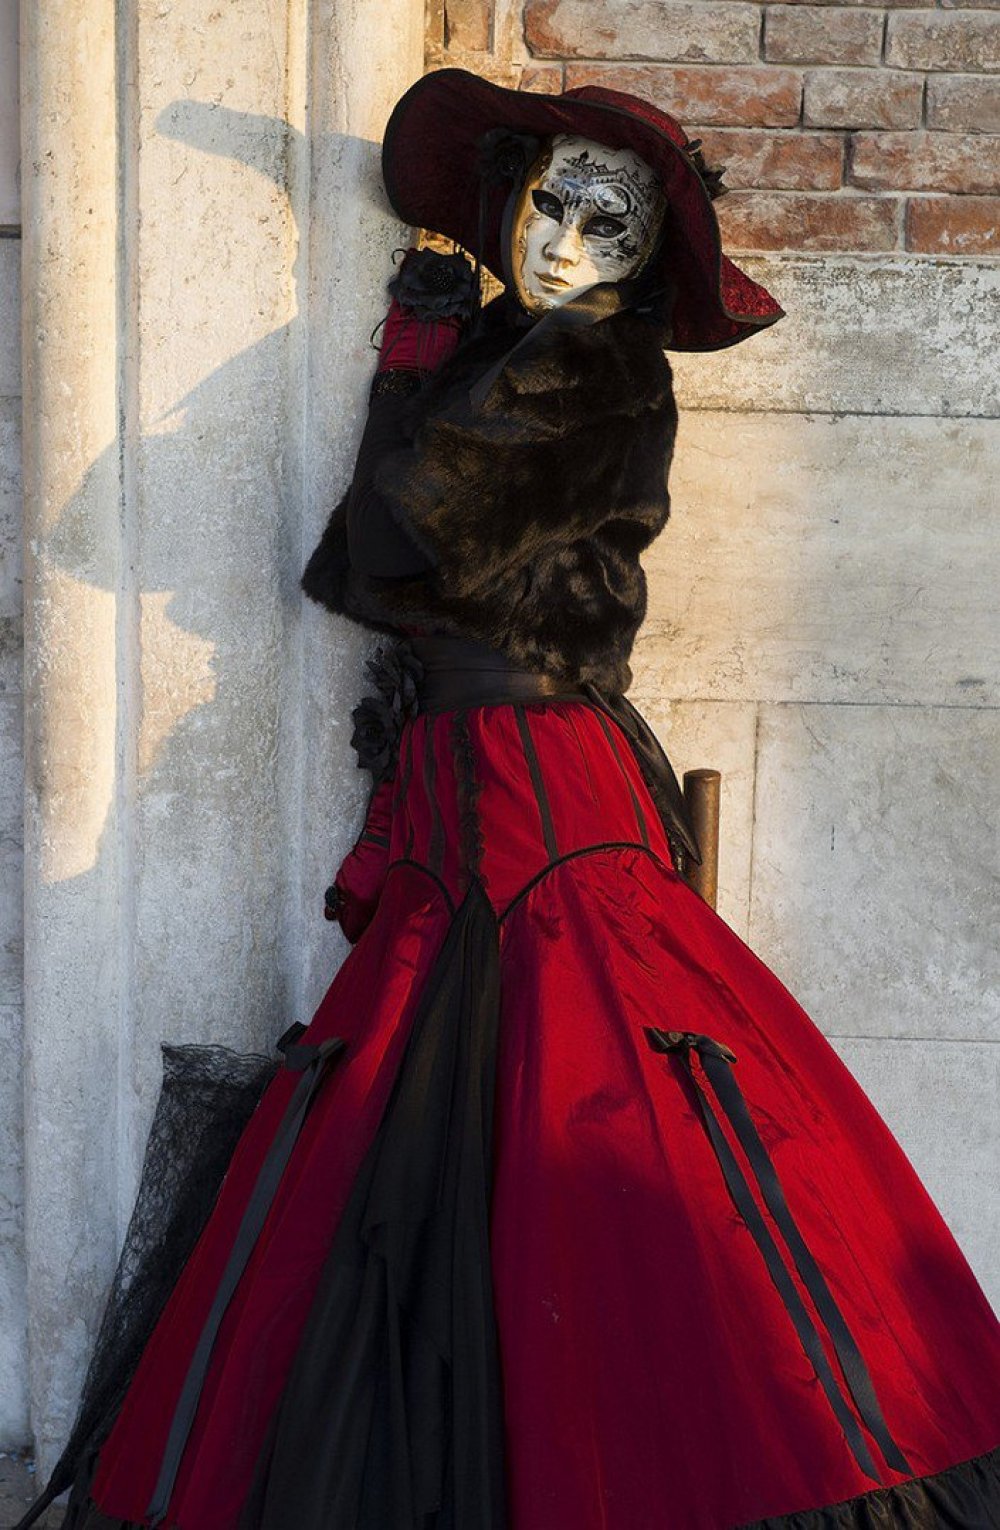 The Venice Carnival in All Its Glory